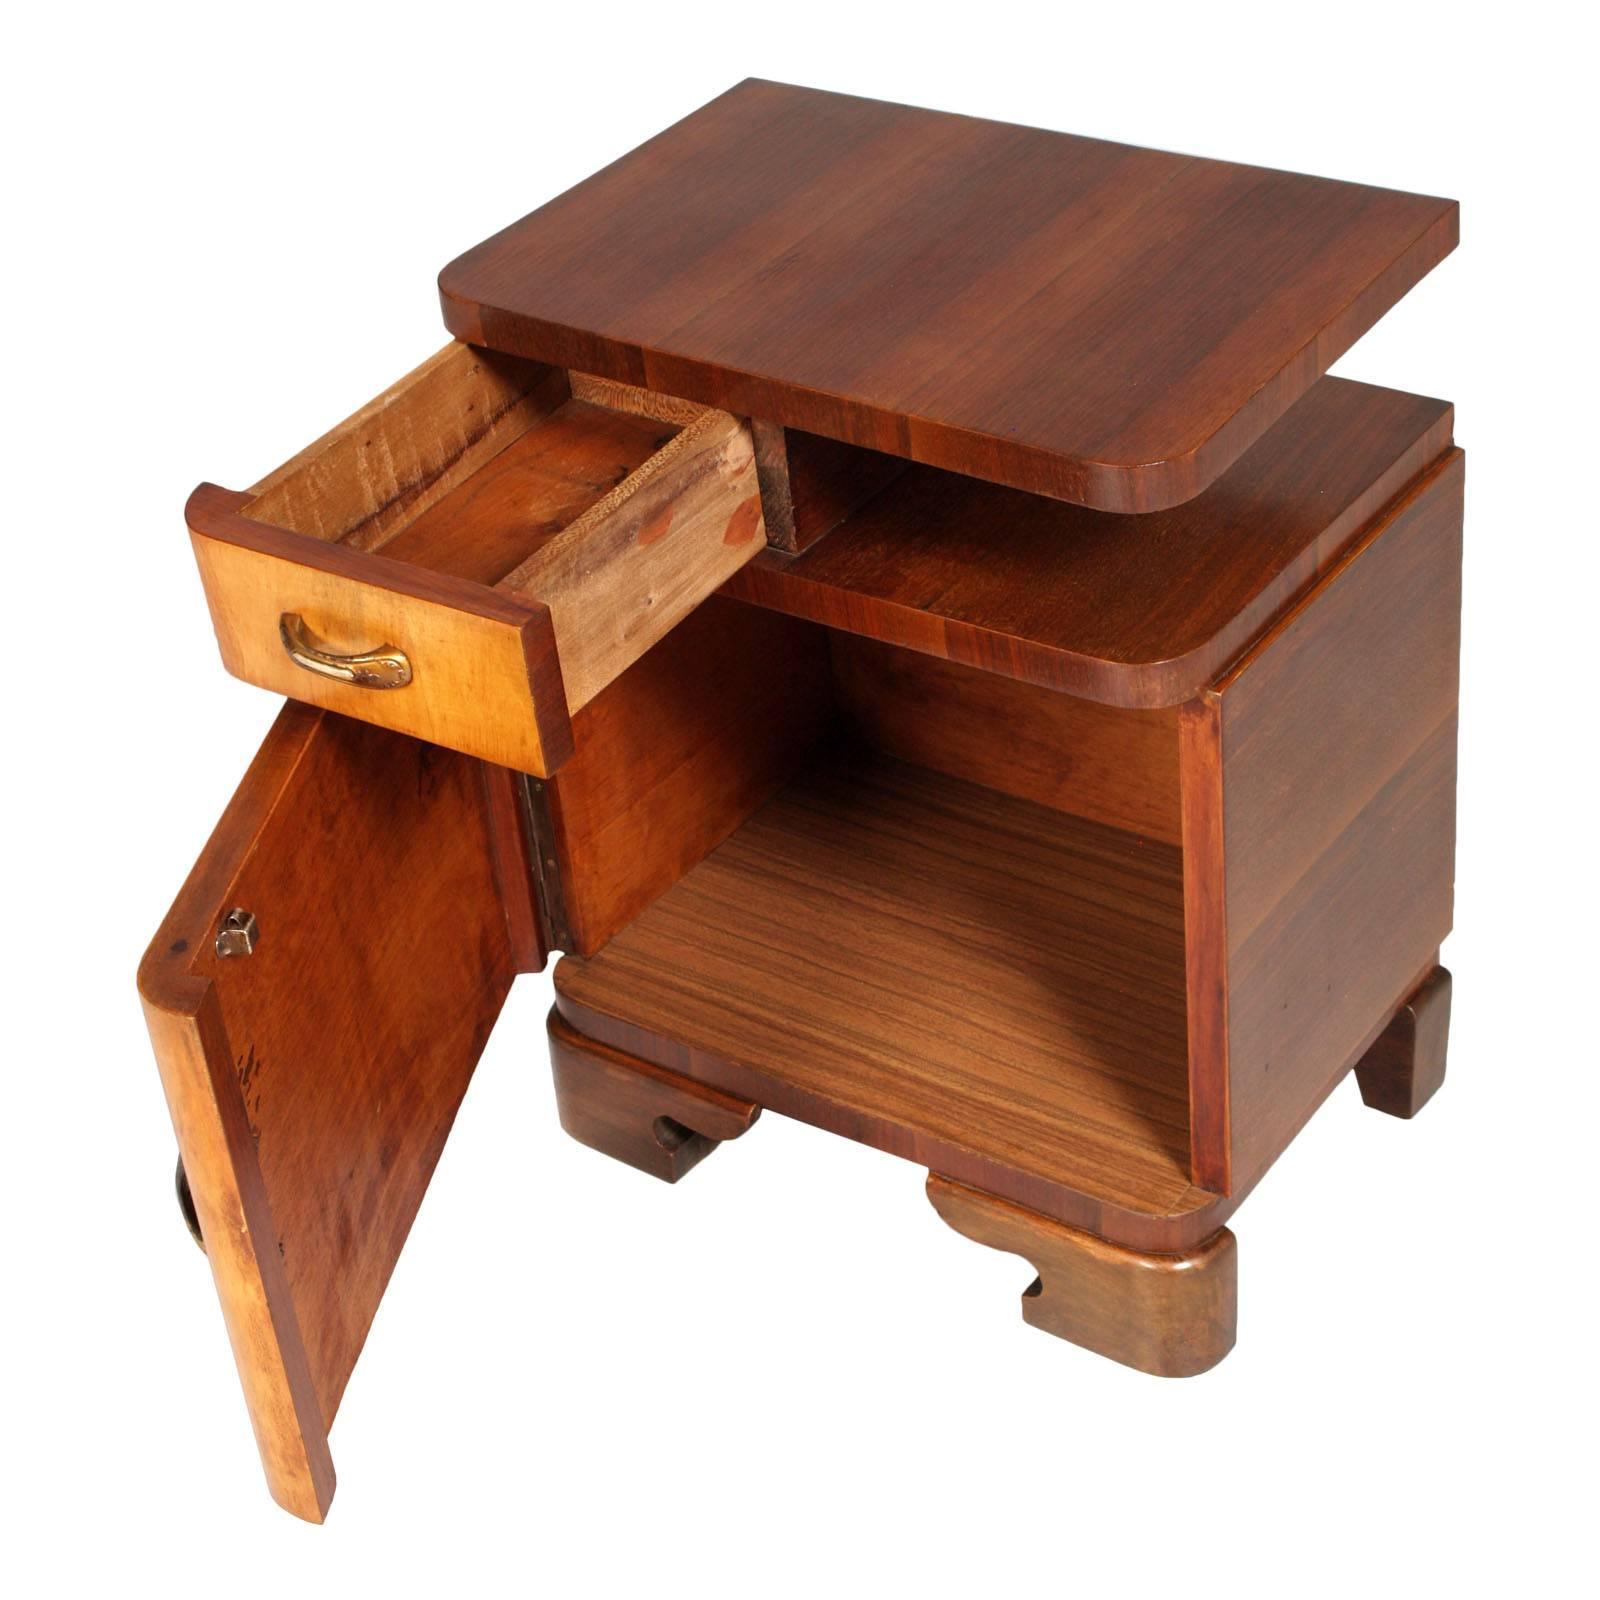 Wax polished 1920s nice bicolor bedside table Art Deco in burl elm and rosewood by Gaetano Borsani 

Measures cm: H 66, W 53, D 38 (shelf height 10cm).